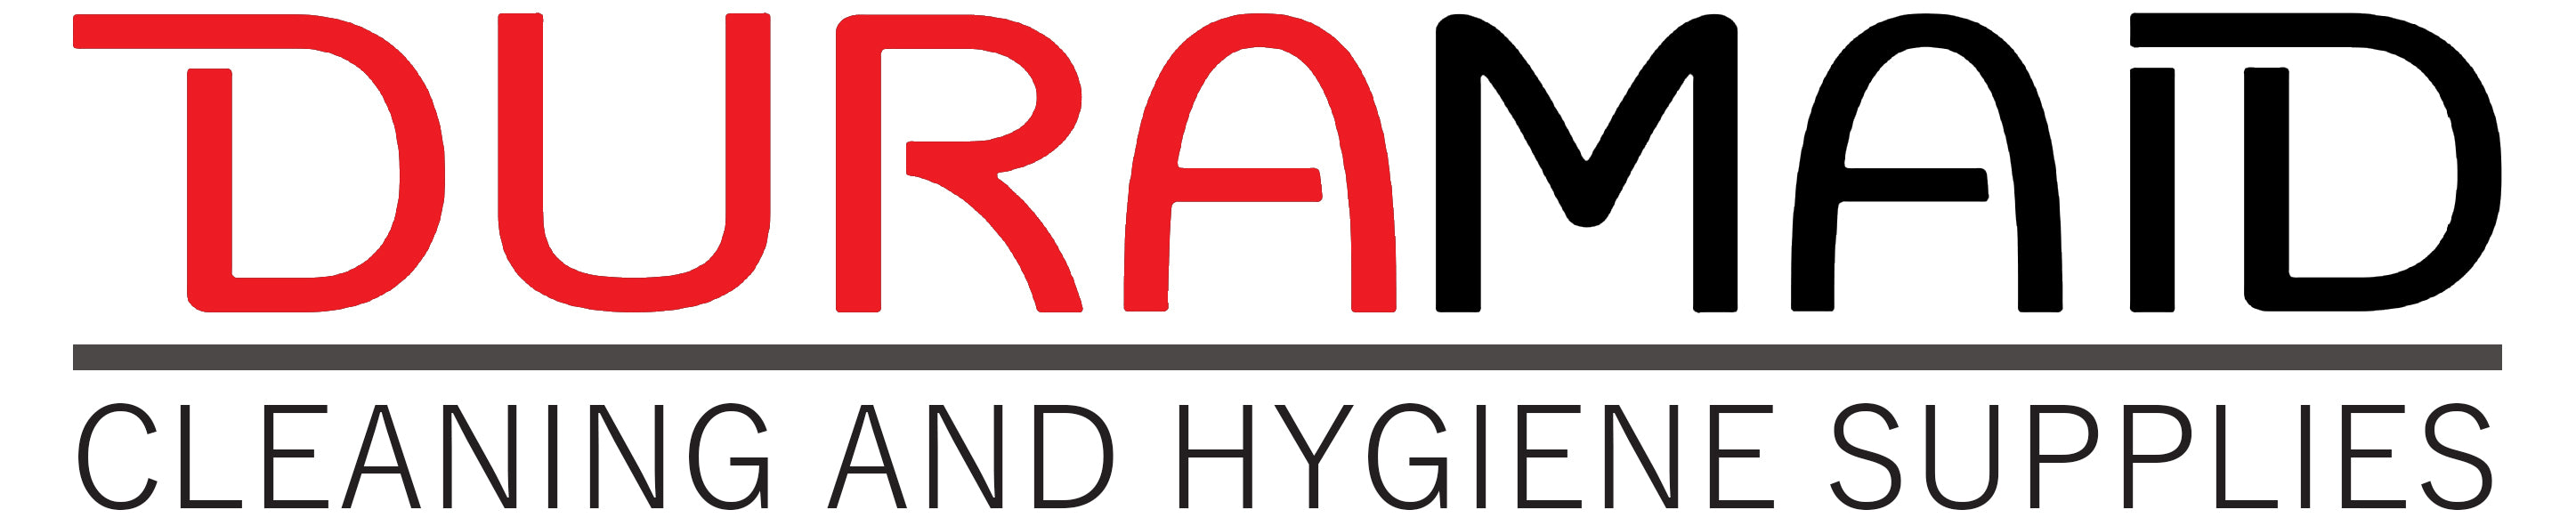 Duramaid Cleaning and Hygiene Supplies